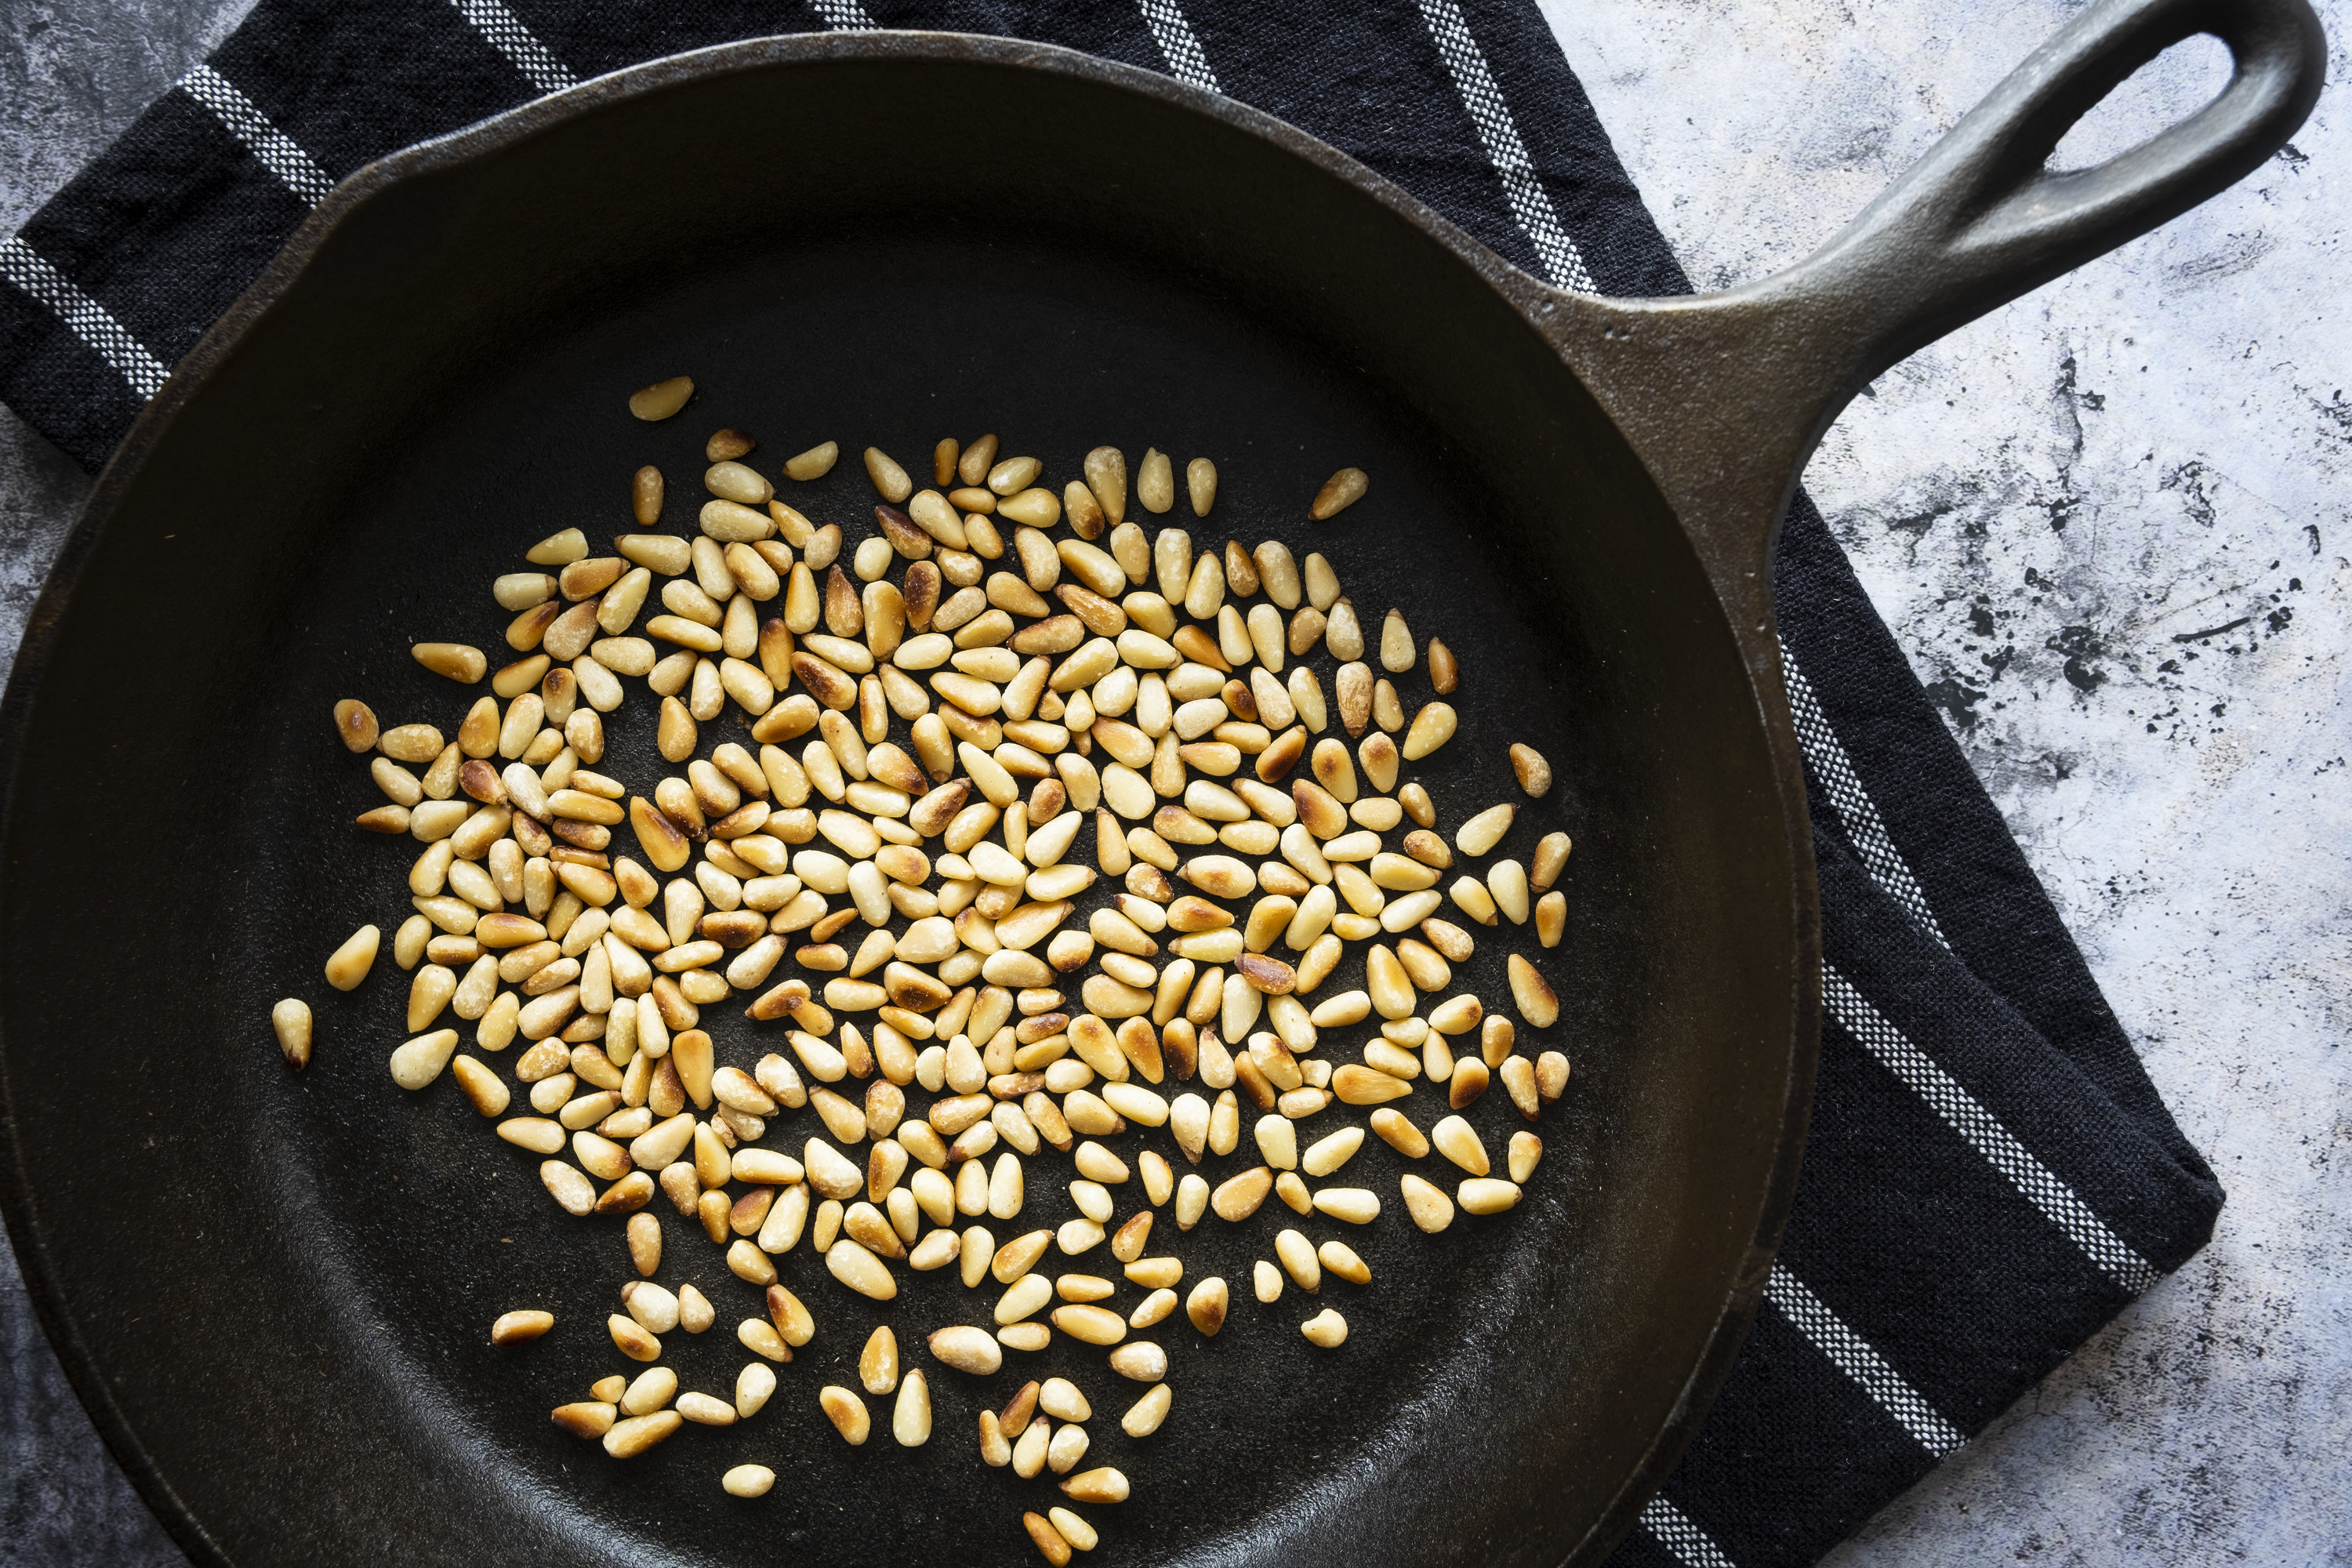 Toasted pine nuts in a cast iron skillet on a black tea towel.